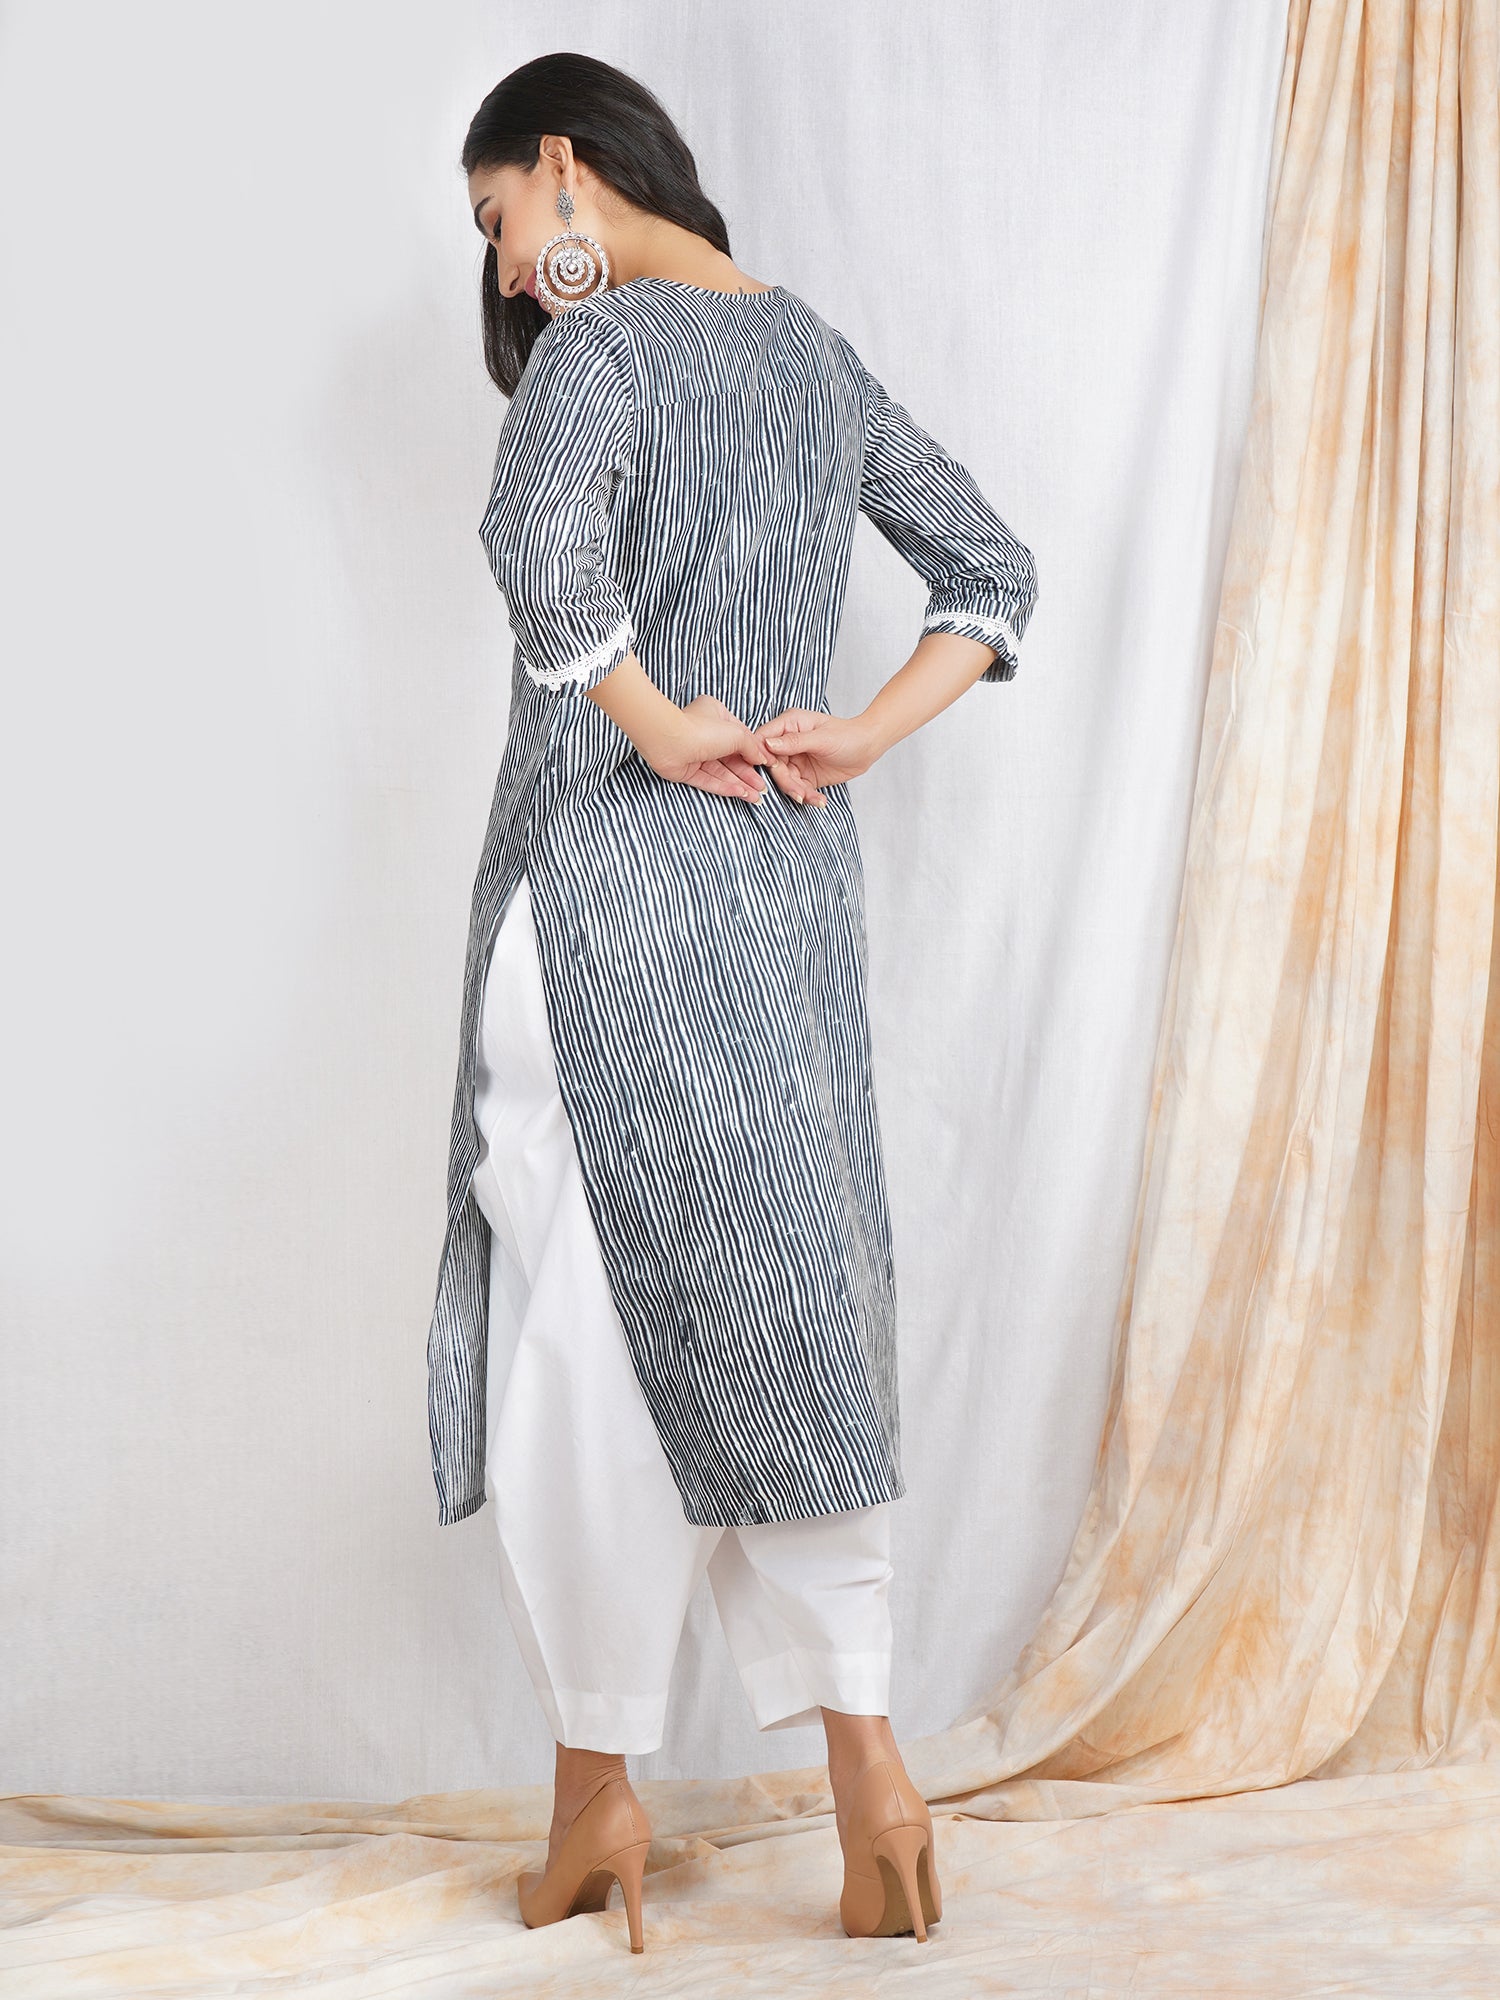 Grey Striped Kurti with White Pants for women